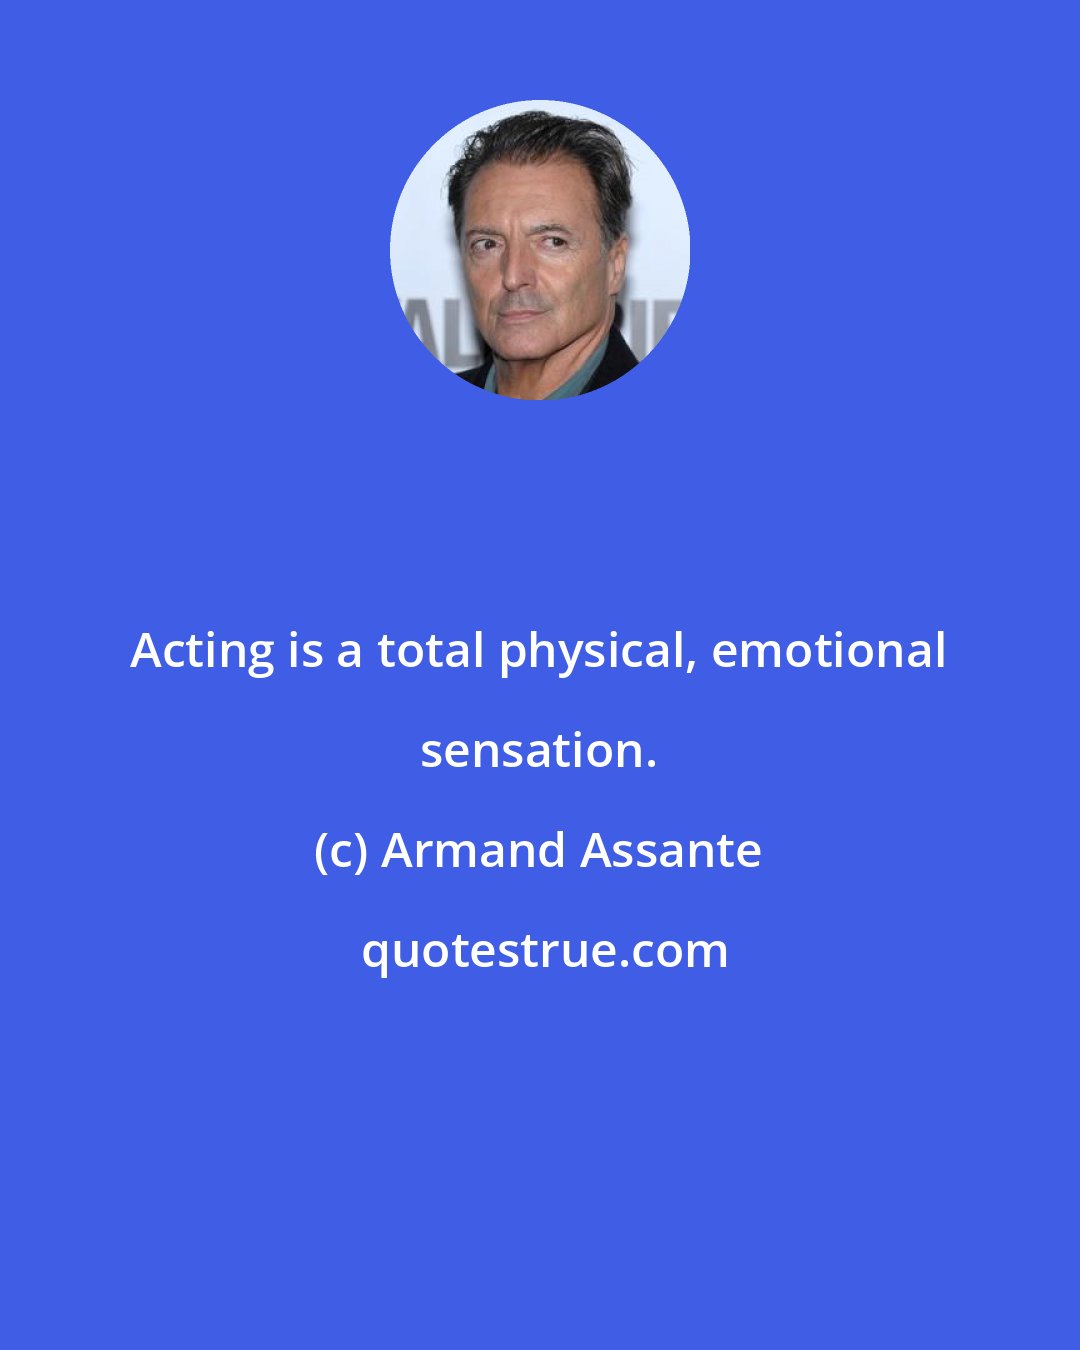 Armand Assante: Acting is a total physical, emotional sensation.